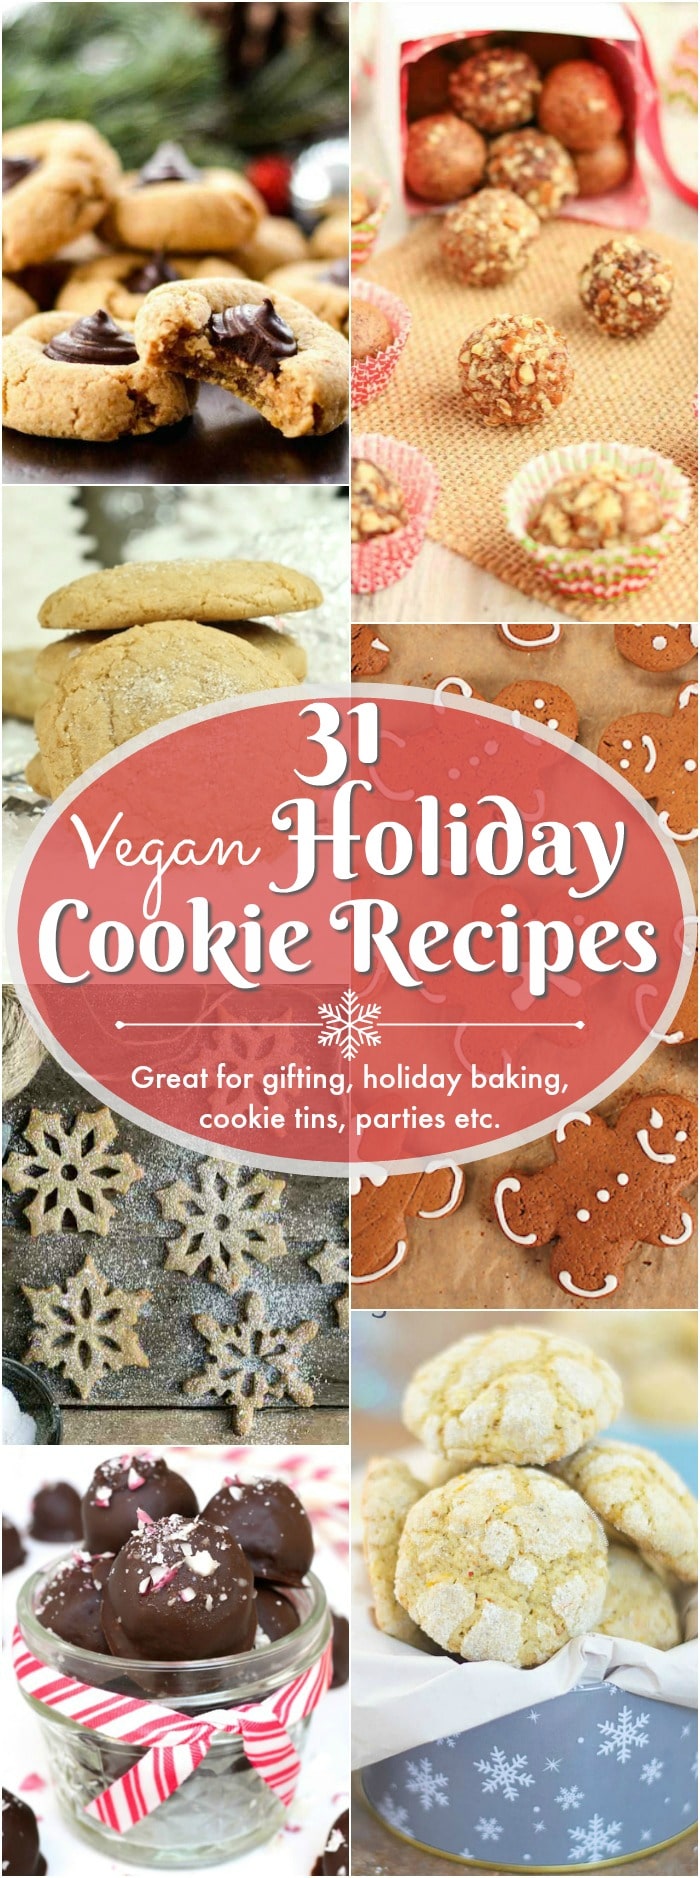 31 holiday favorite cookie & truffle recipes. Some healthy. Some decadent. But, they’re all crowd pleasers! Fill up those festive tins, gift boxes and cookie platters with a variety of vegan holiday cookies and truffles! Plenty of gluten-free options too!